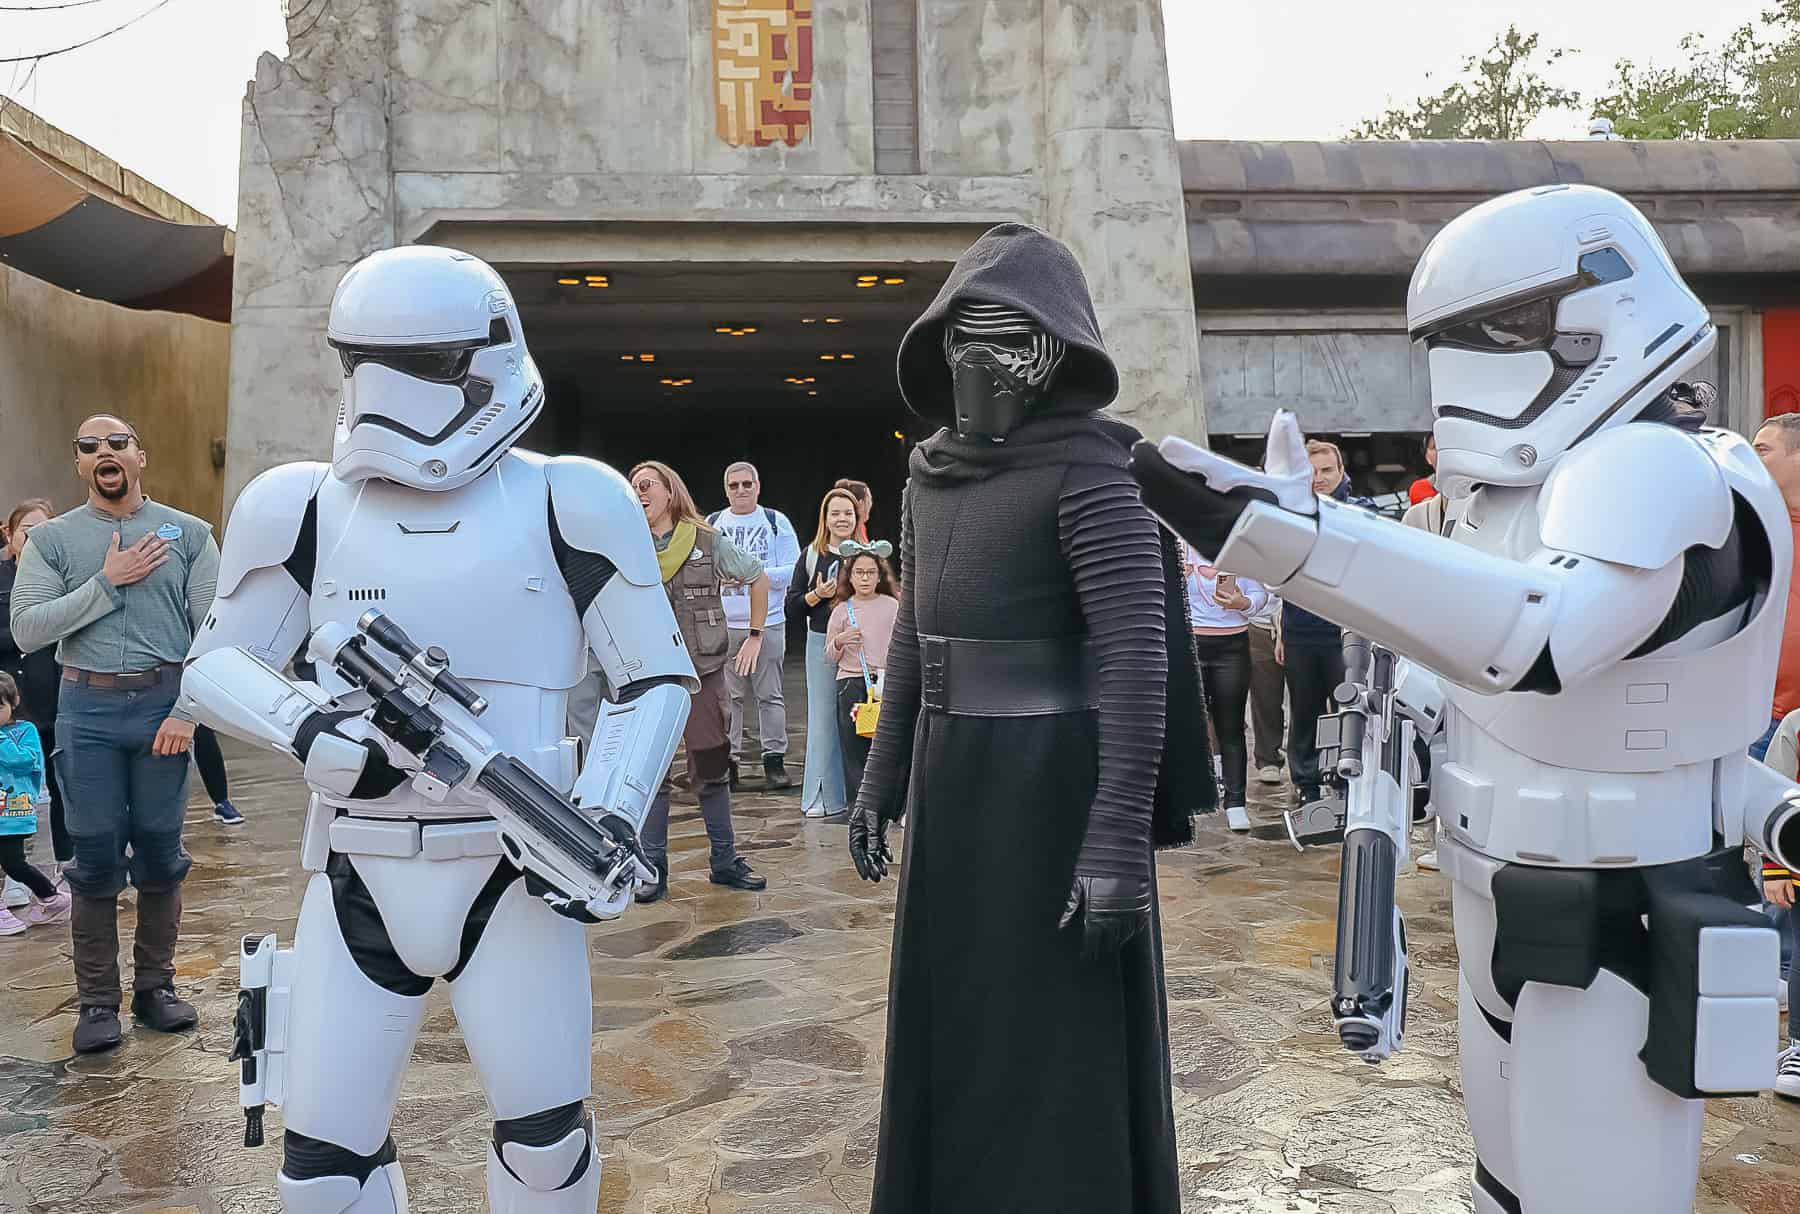 Kylo Ren roaming among guests in Galaxy's Edge at Disney World. 